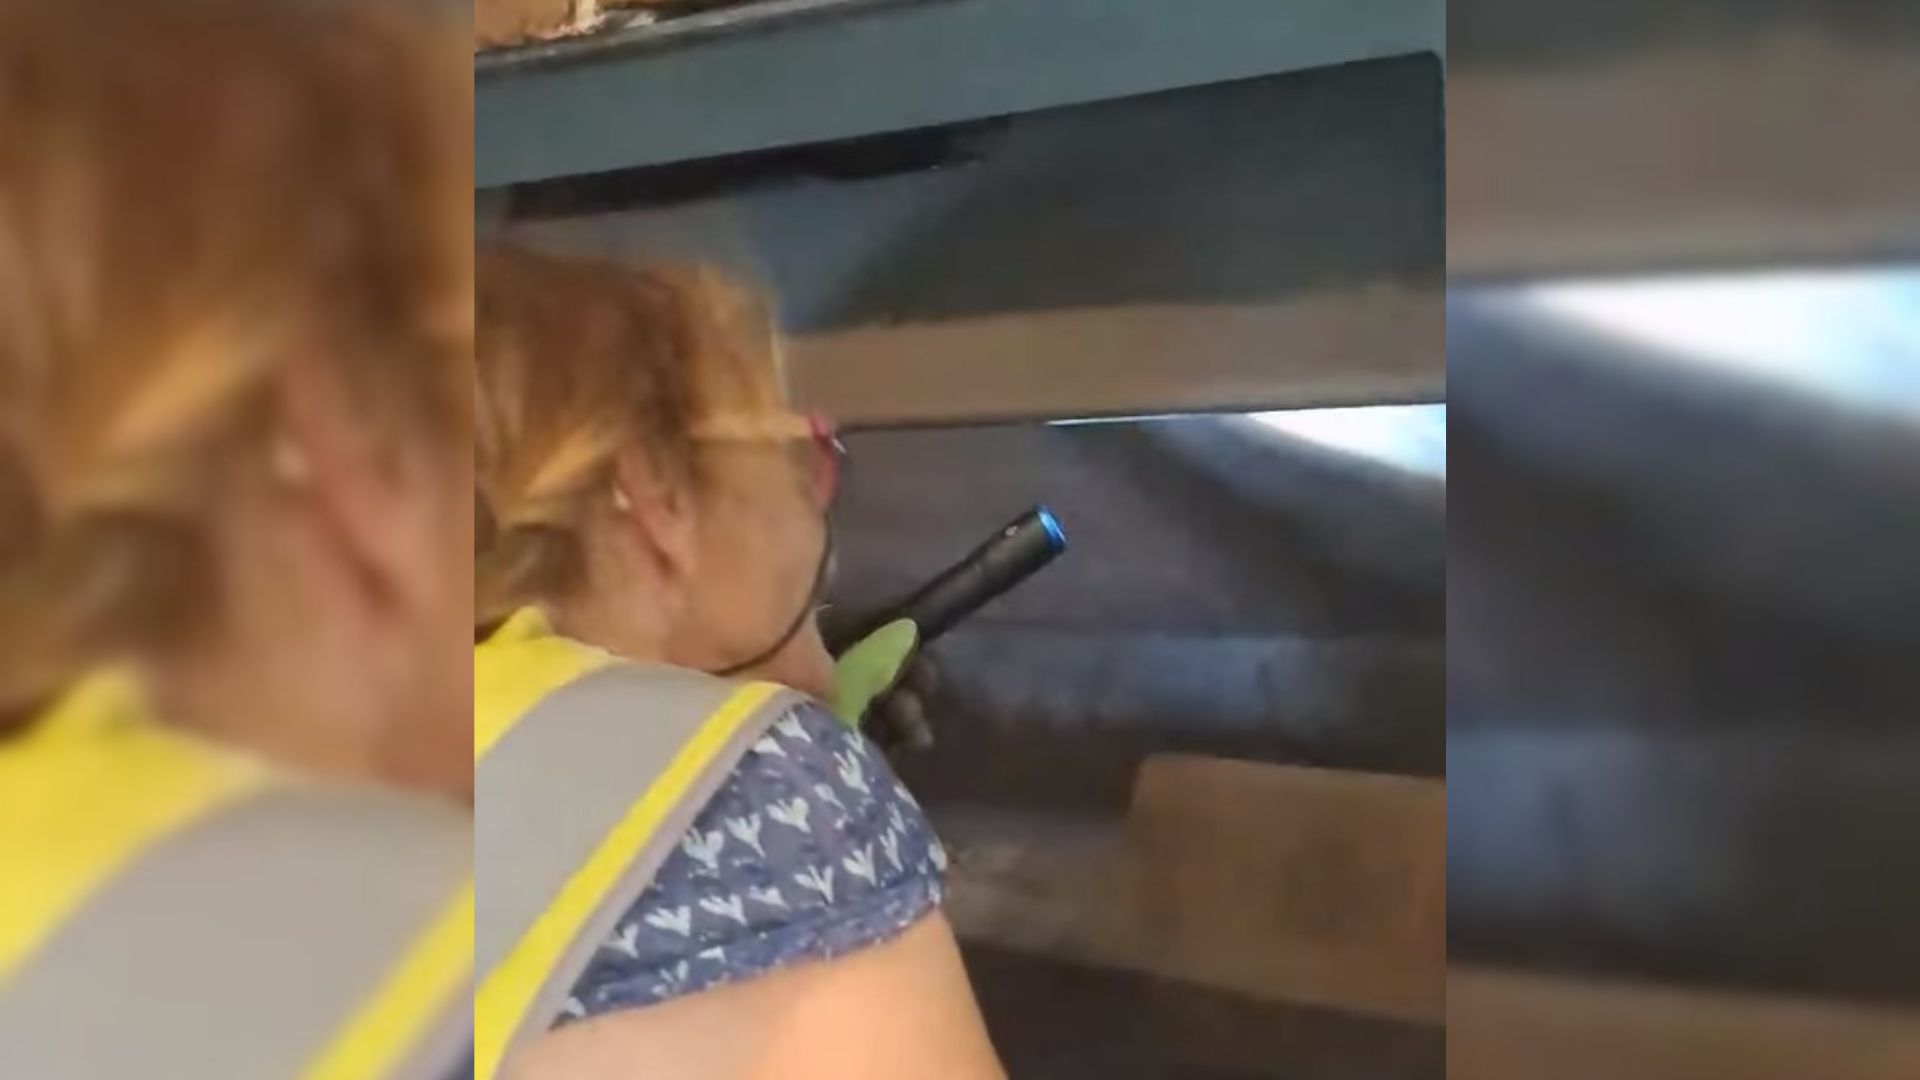 Homeowners Hear Strange Noise Coming From The Fireplace, Then Come To A Shocking Realization